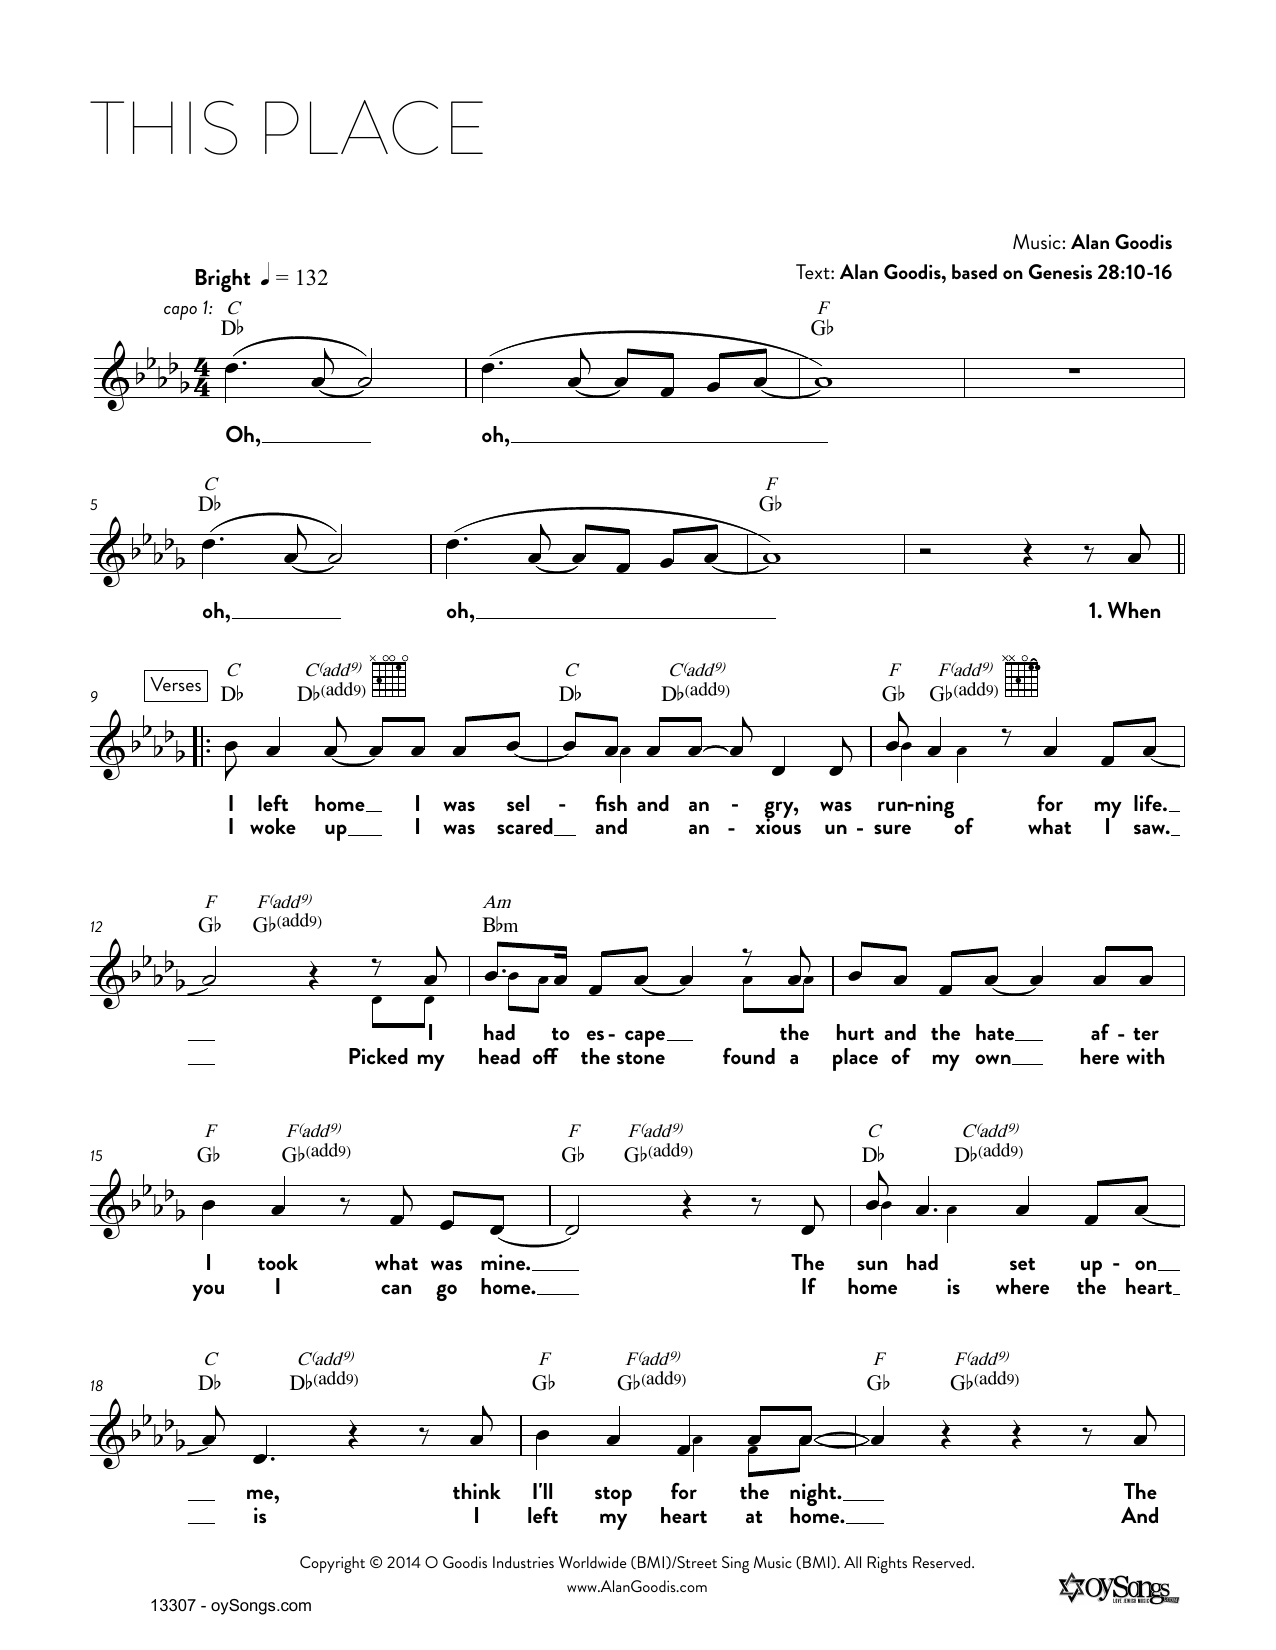 Alan Goodis This Place sheet music notes and chords. Download Printable PDF.